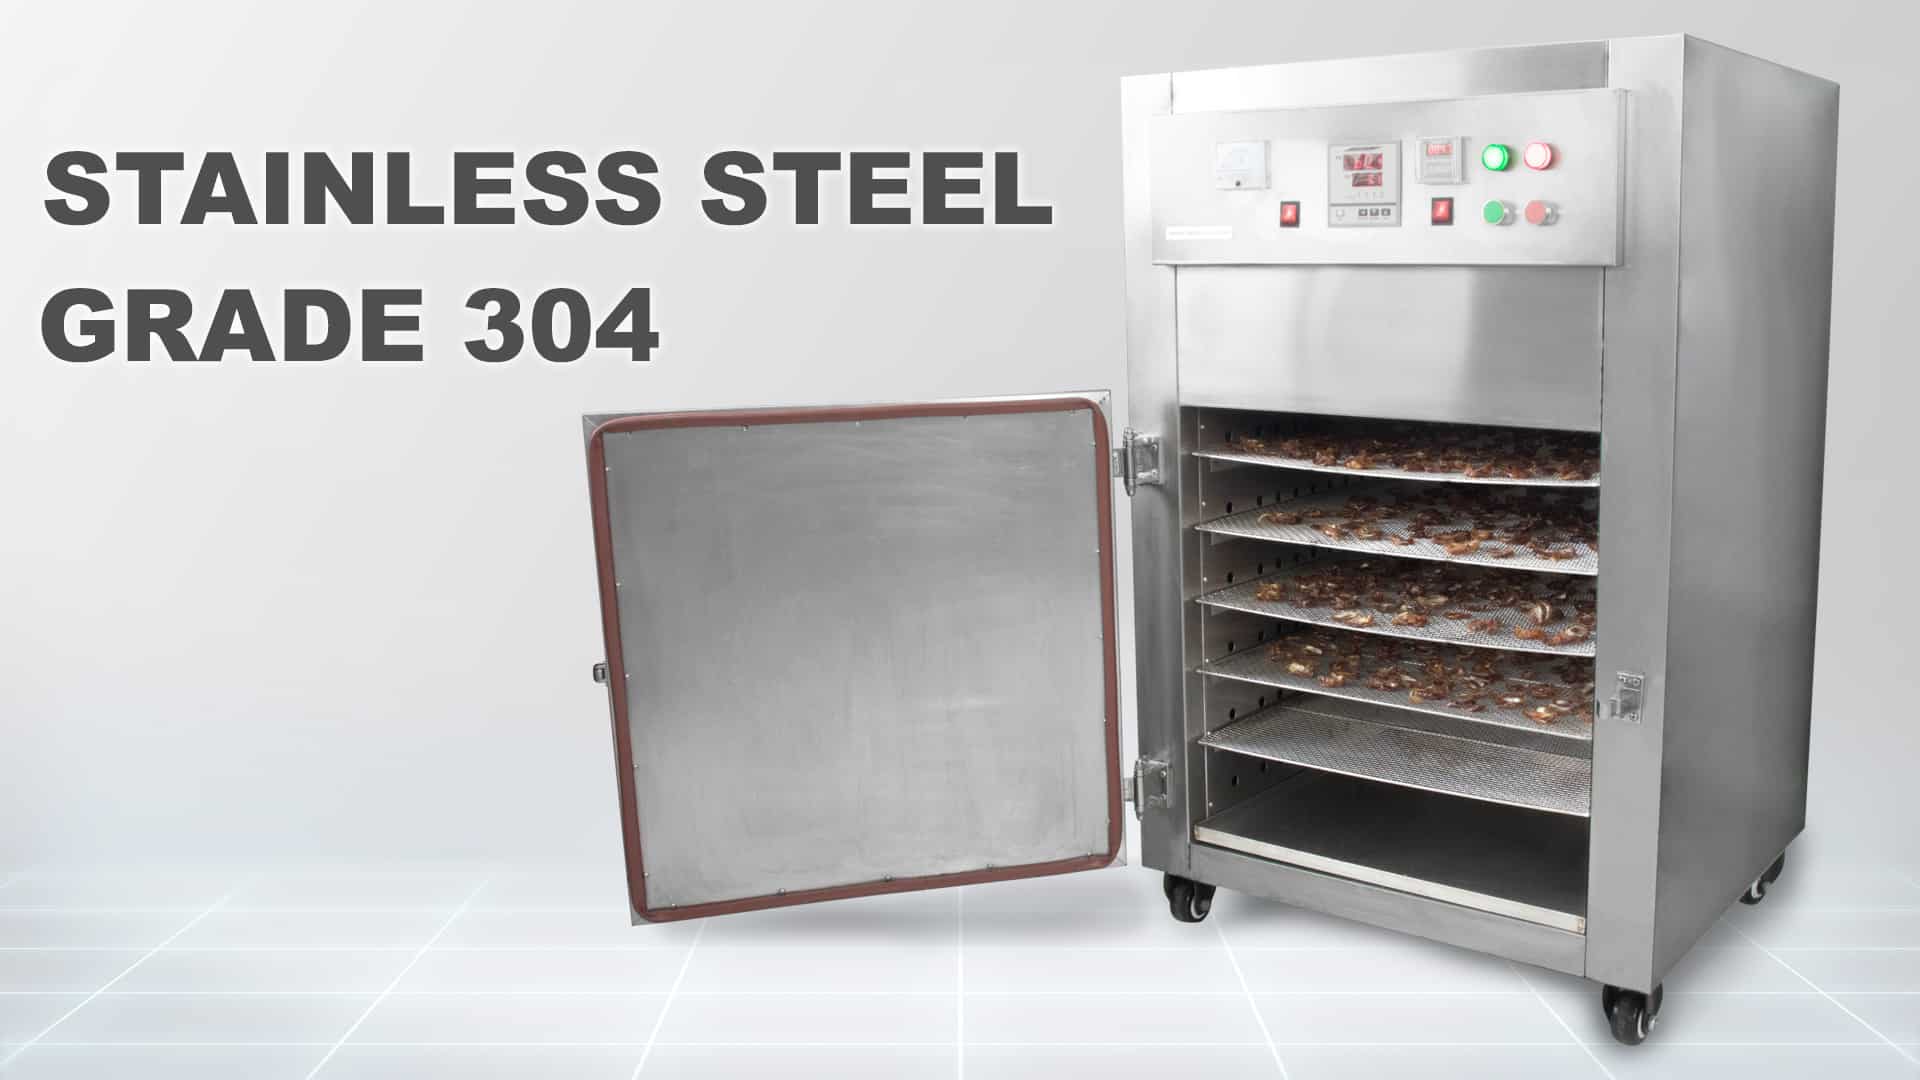 Hot Air Oven-Hot Air Oven-GE-GEN2-Stainless Steel